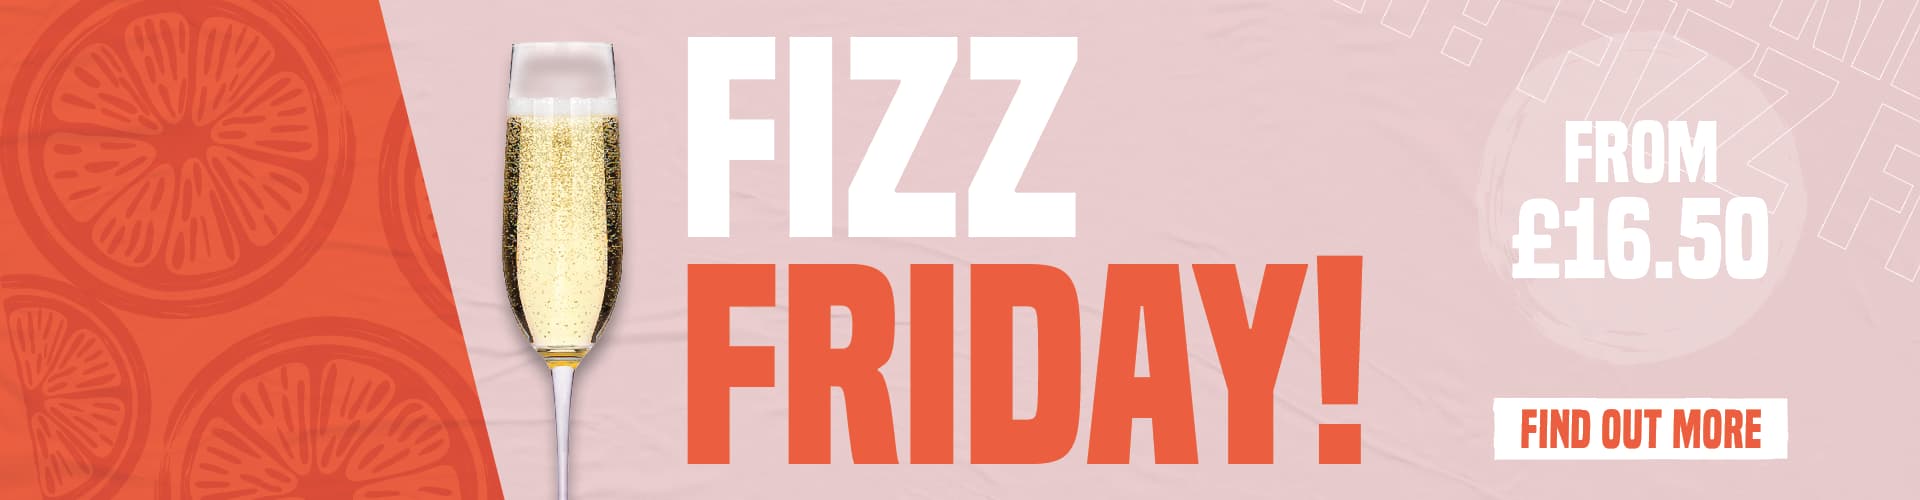 Fizz Friday, from £16.50 - Find Out More